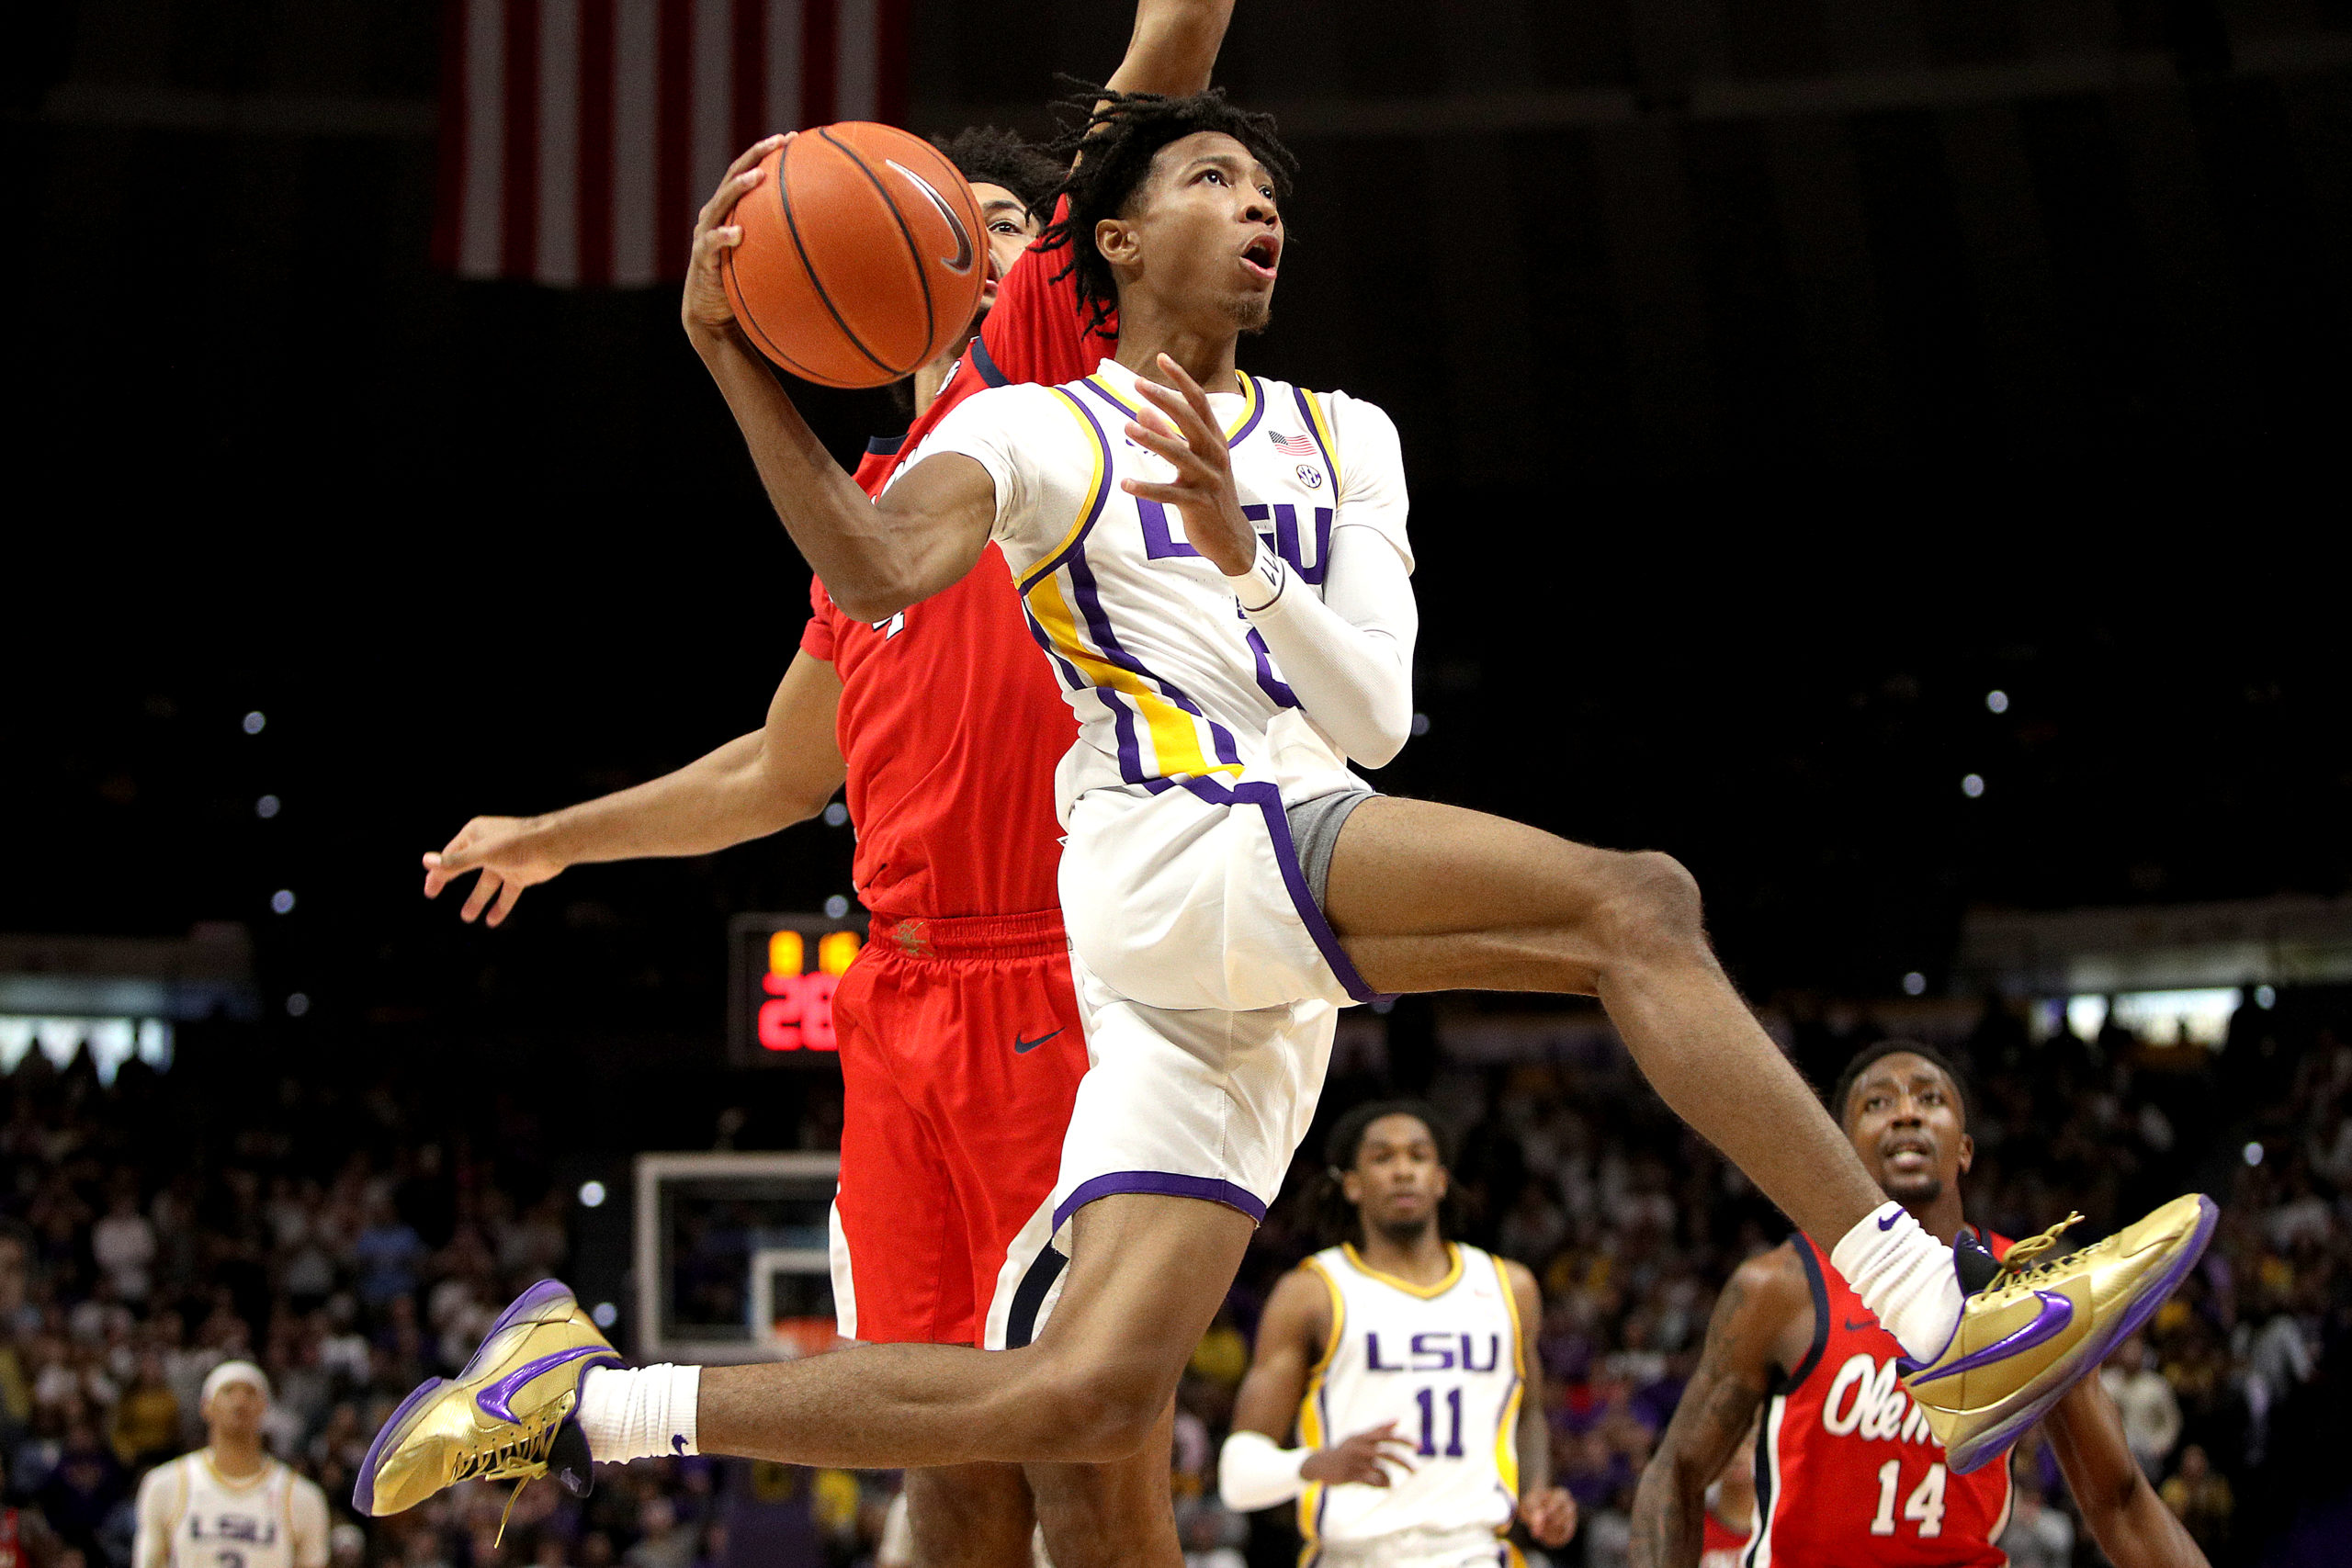 BATON ROUGE, LOUISIANA - FEBRUARY 01: Eric Gaines #2 of the LSU Tigers drives to the basket past Jaemyn Brakefield #4 of the Mississippi Rebels during the second half at Pete Maravich Assembly Center on February 01, 2022 in Baton Rouge, Louisiana. (Photo by Sean Gardner/Getty Images)